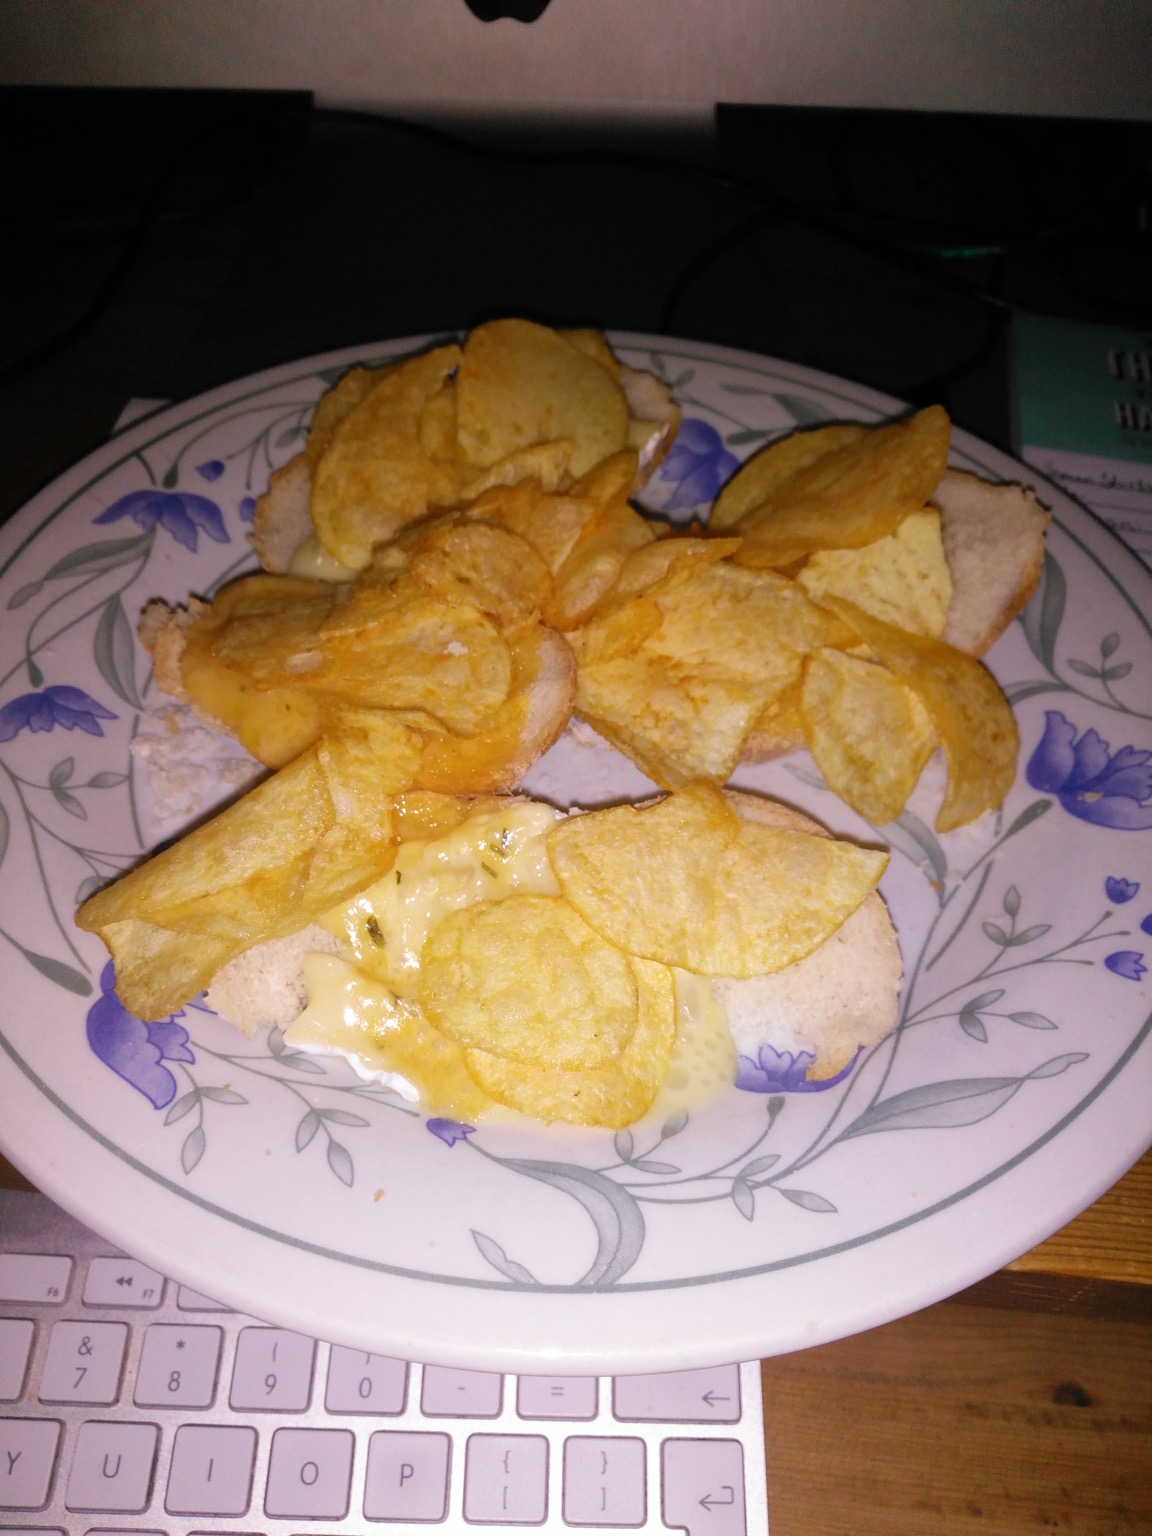 Flash photo of crisps and cheese on white bread